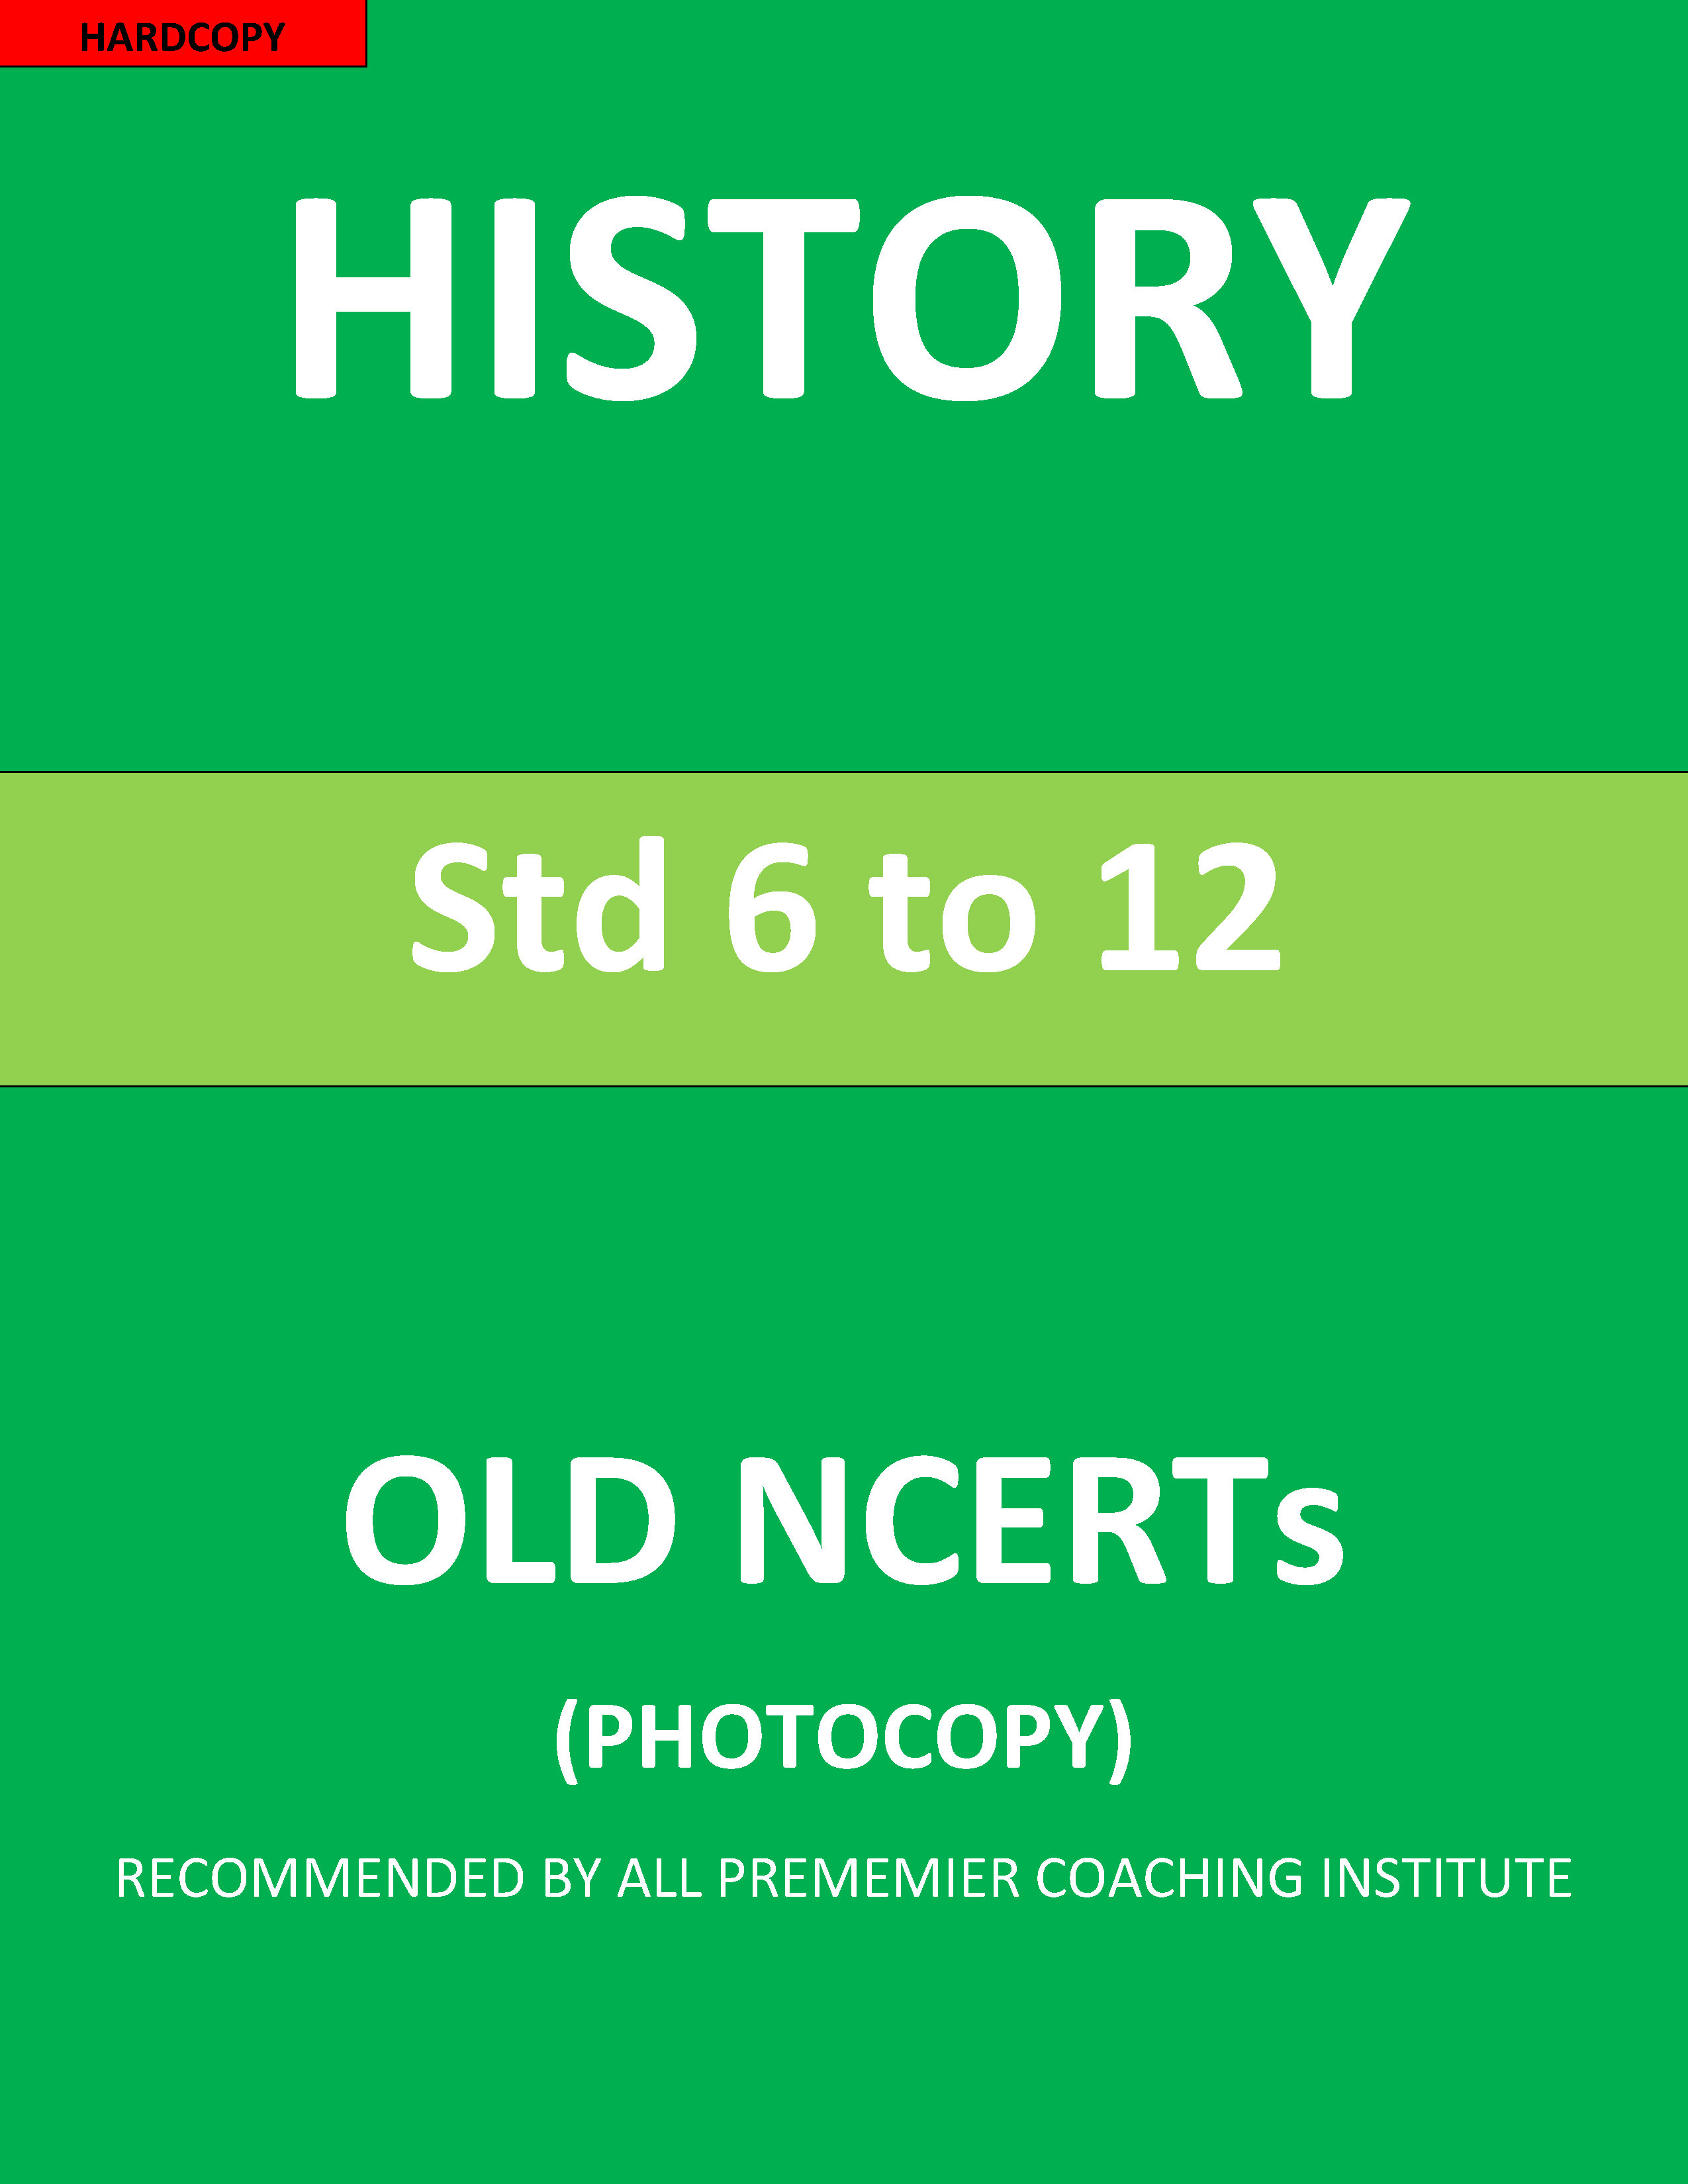 Old NCERT 6th to 12th History Printed